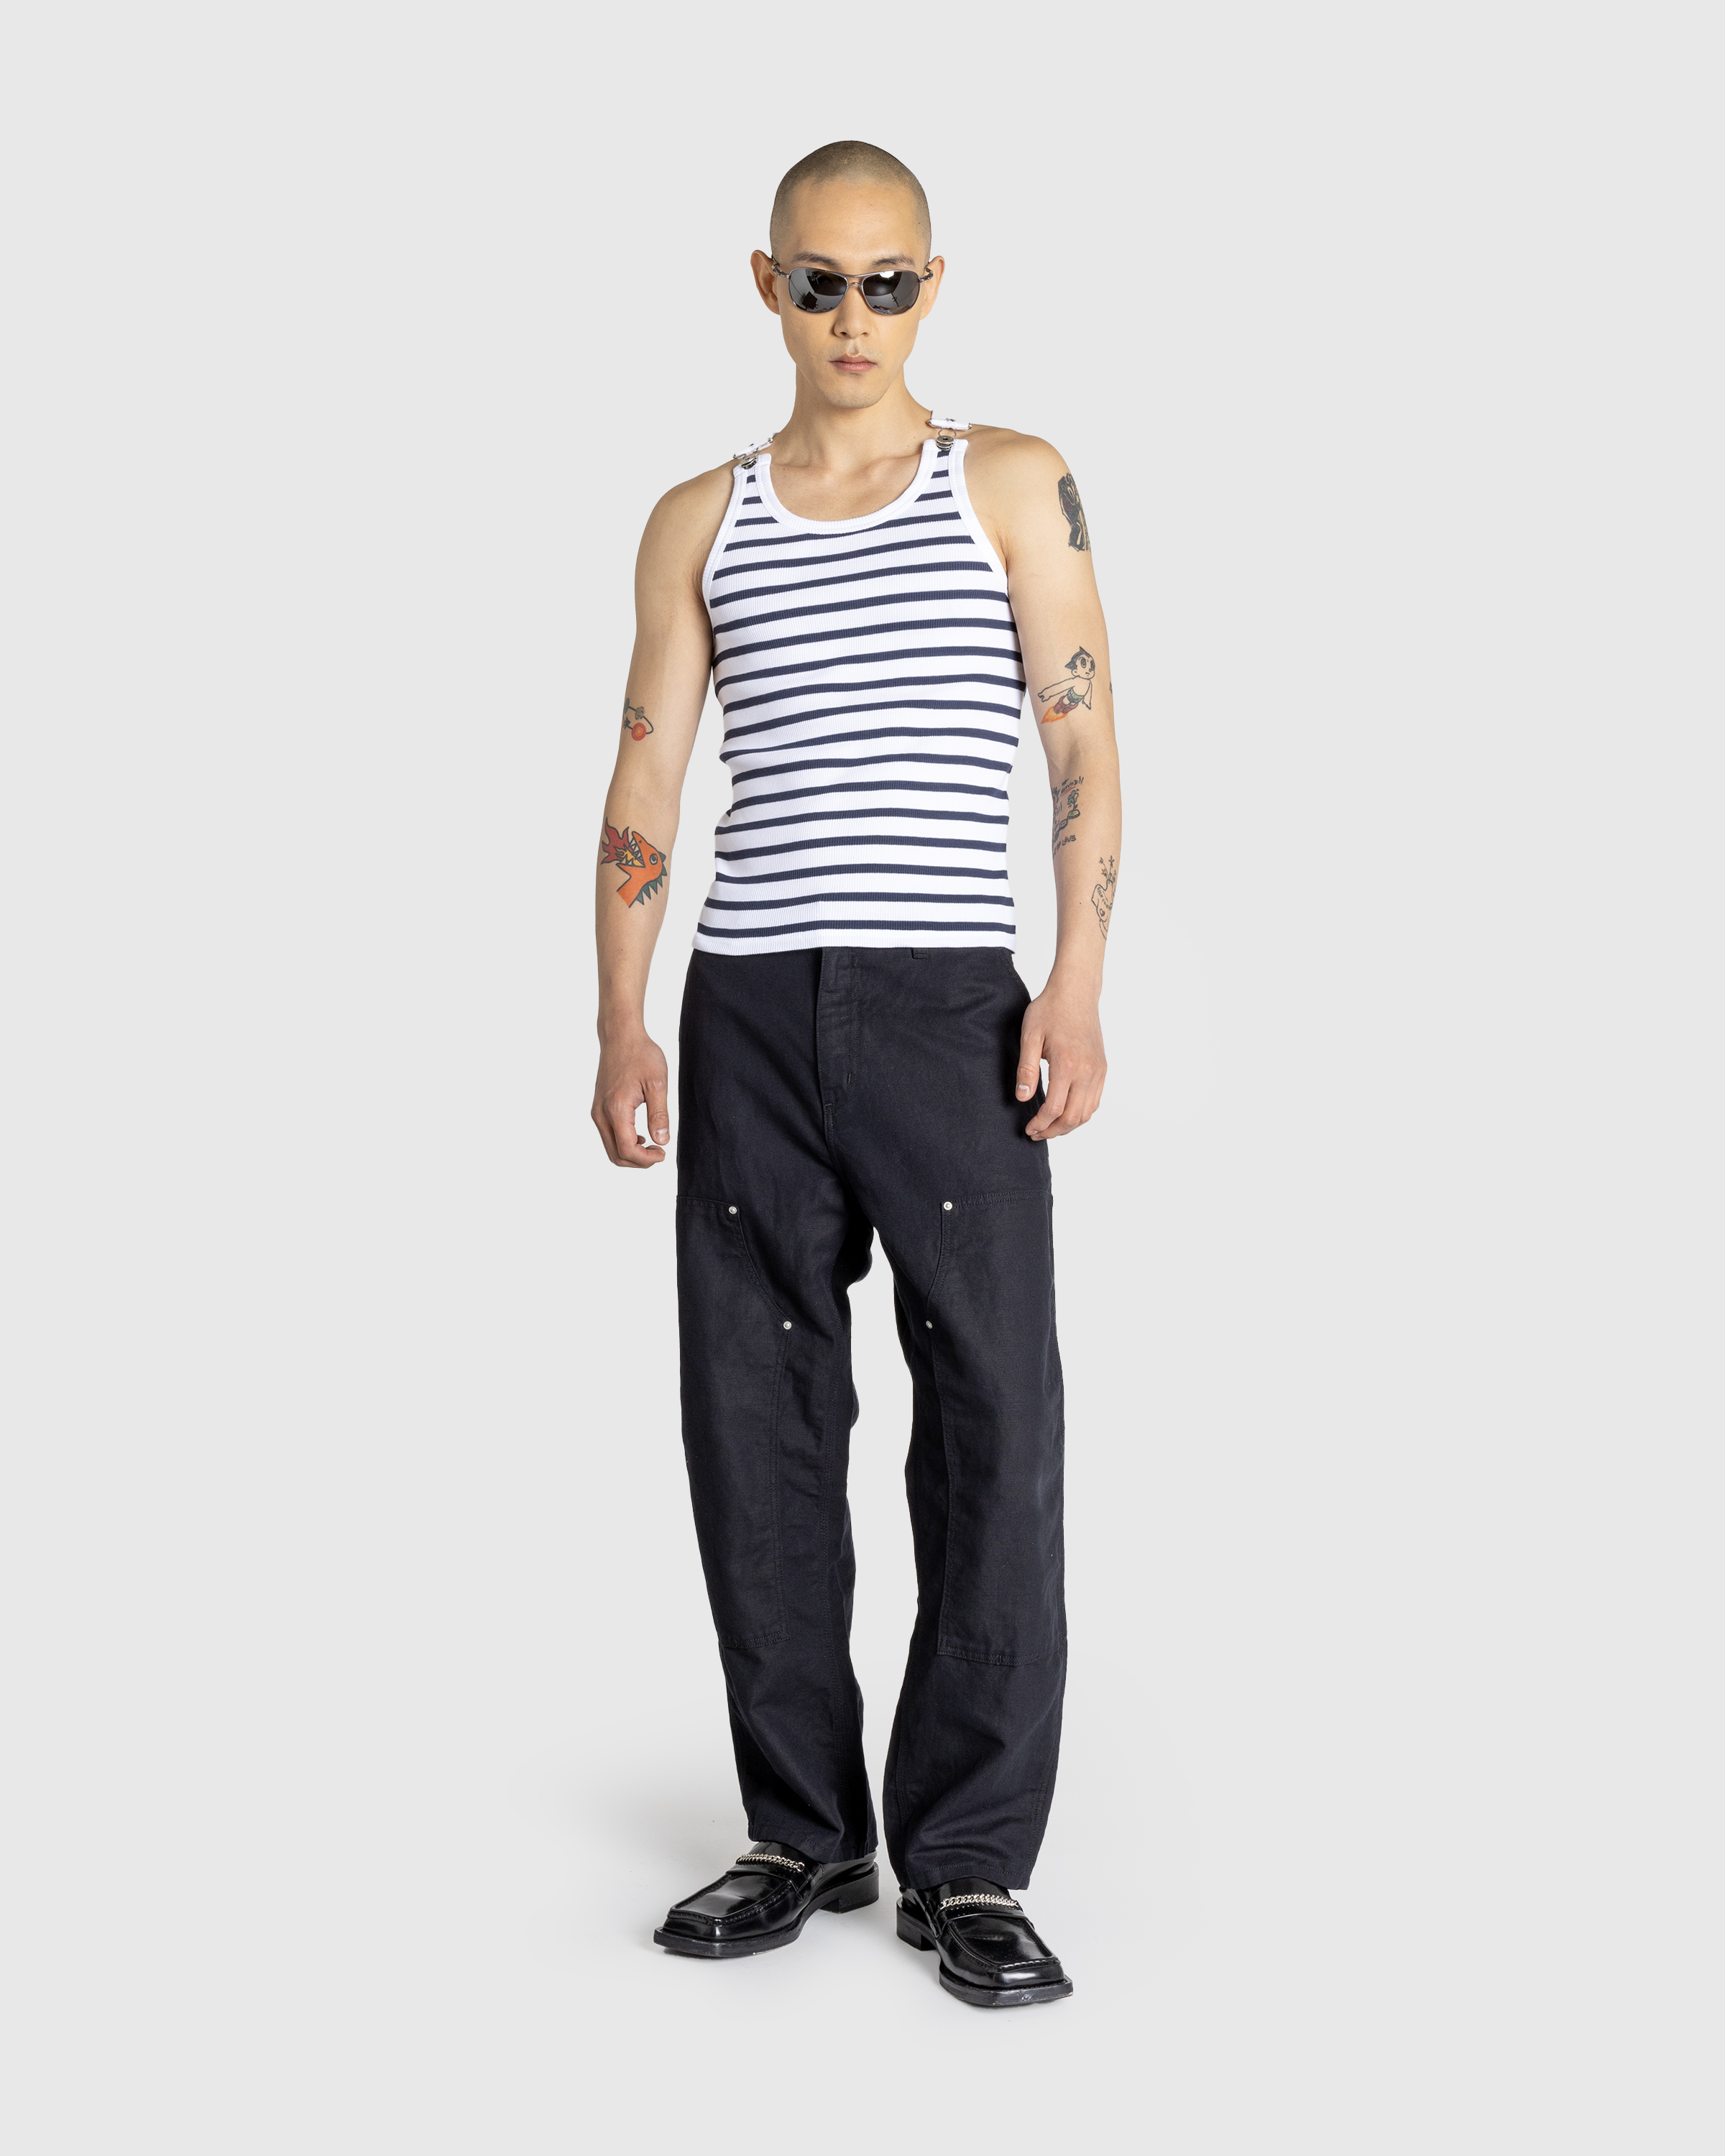 Jean Paul Gaultier – Ribbed Mariniere Tank Top White/Navy - Tank Tops - White - Image 3